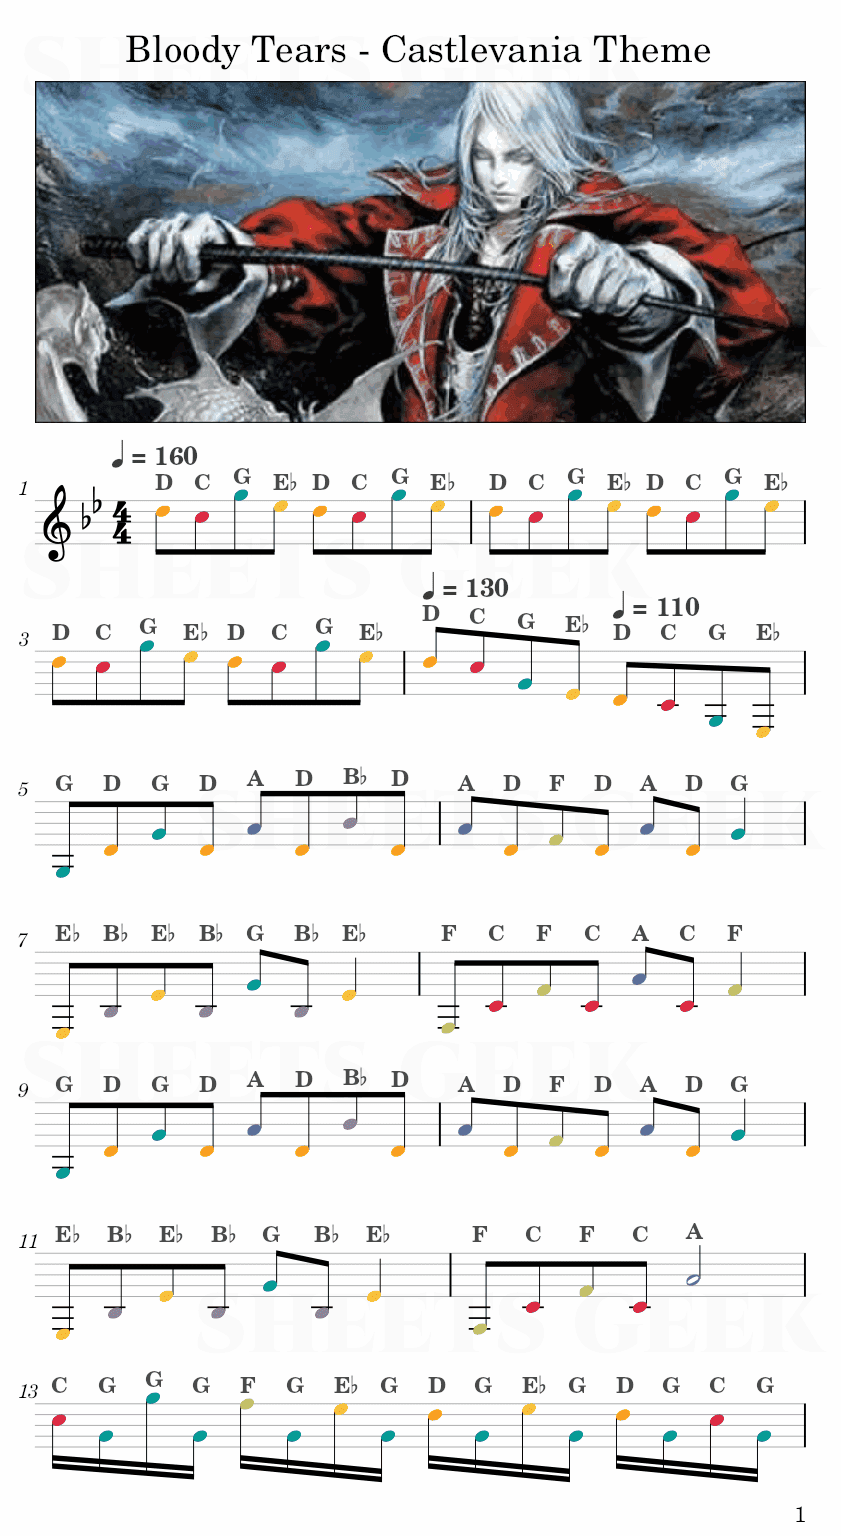 Bloody Tears - Castlevania Theme Easy Sheet Music Free for piano, keyboard, flute, violin, sax, cello page 1